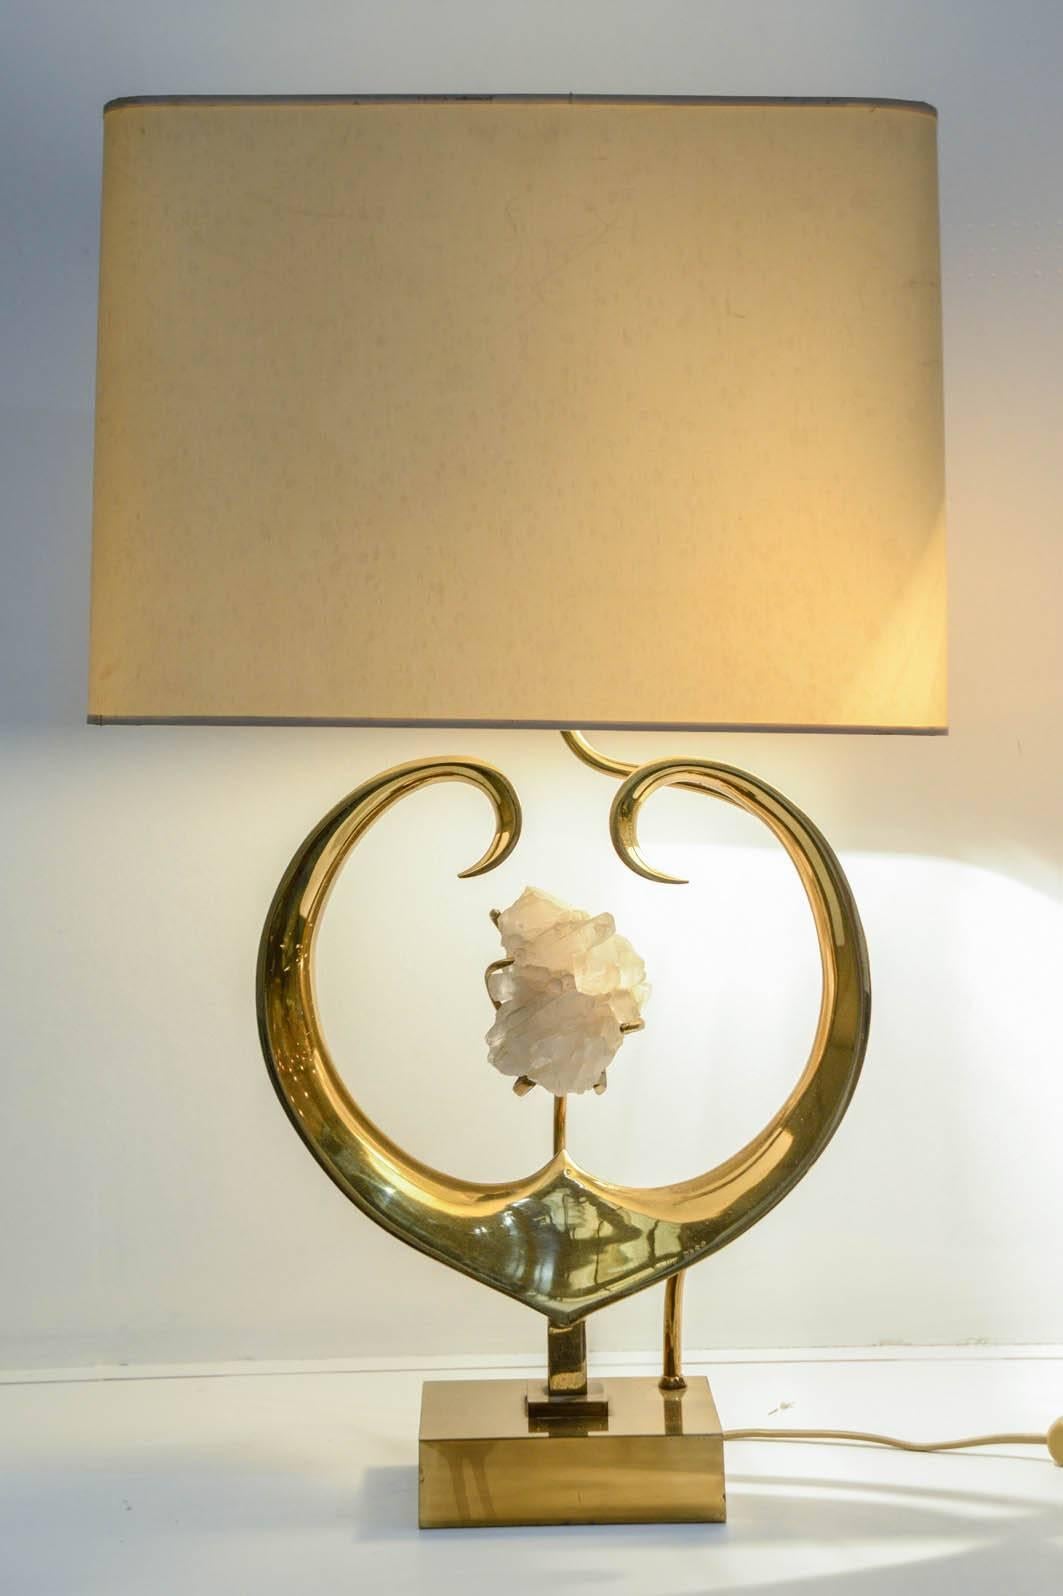 Sculptural polished bronze lamp with quartz.
Shade is not provided,
Dimensions given without shade
Shade: 25 x 40 x 30
Signed.